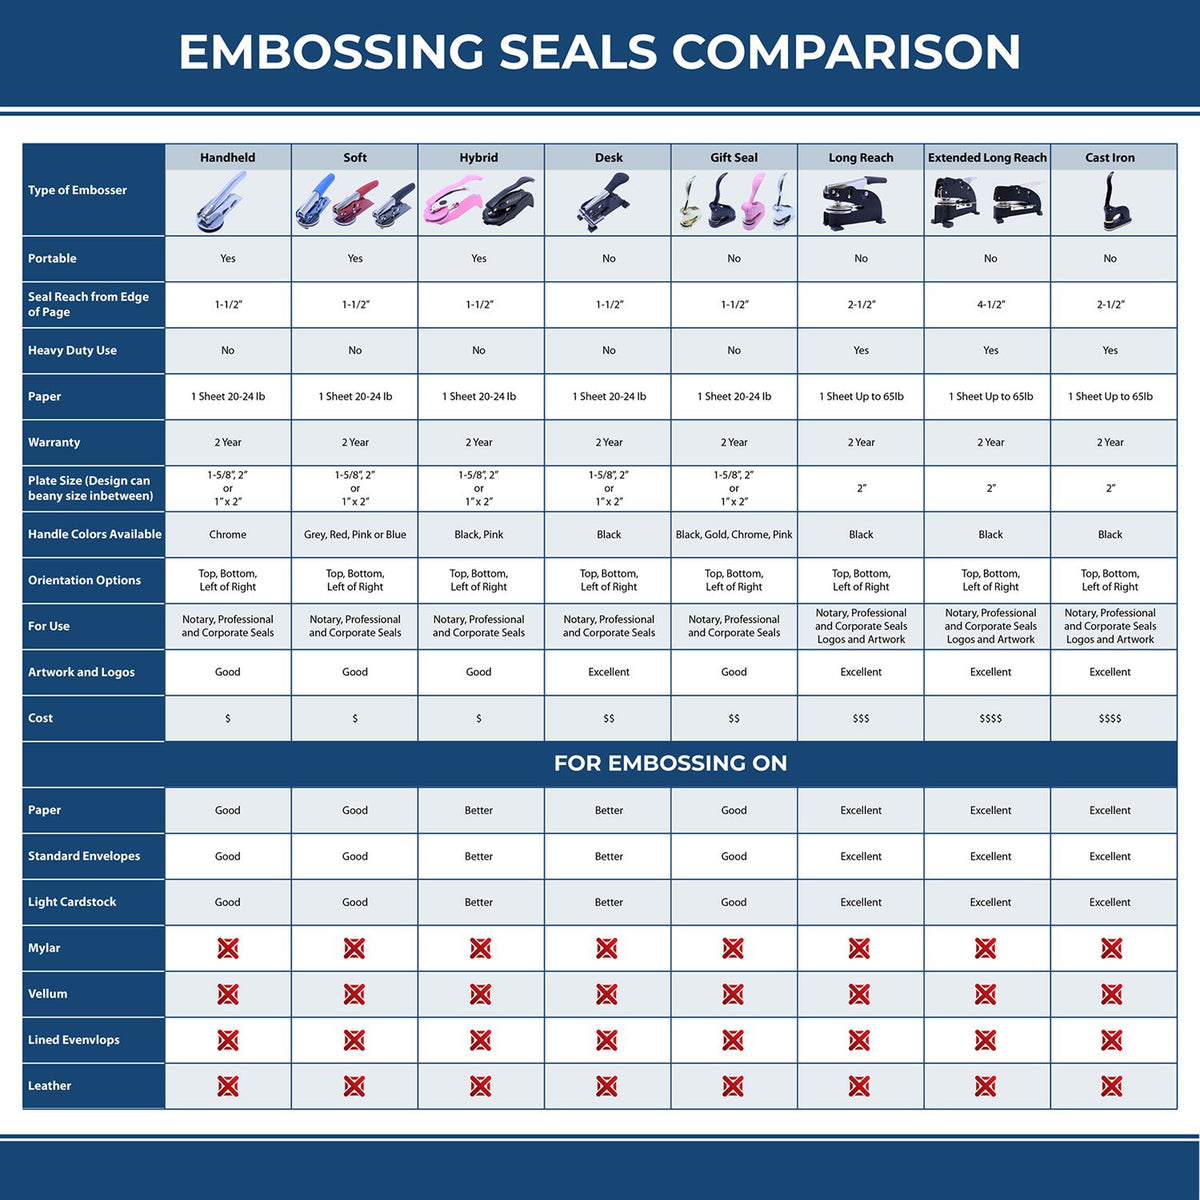 A comparison chart for the different types of mount models available for the Heavy Duty Cast Iron Massachusetts Engineer Seal Embosser.